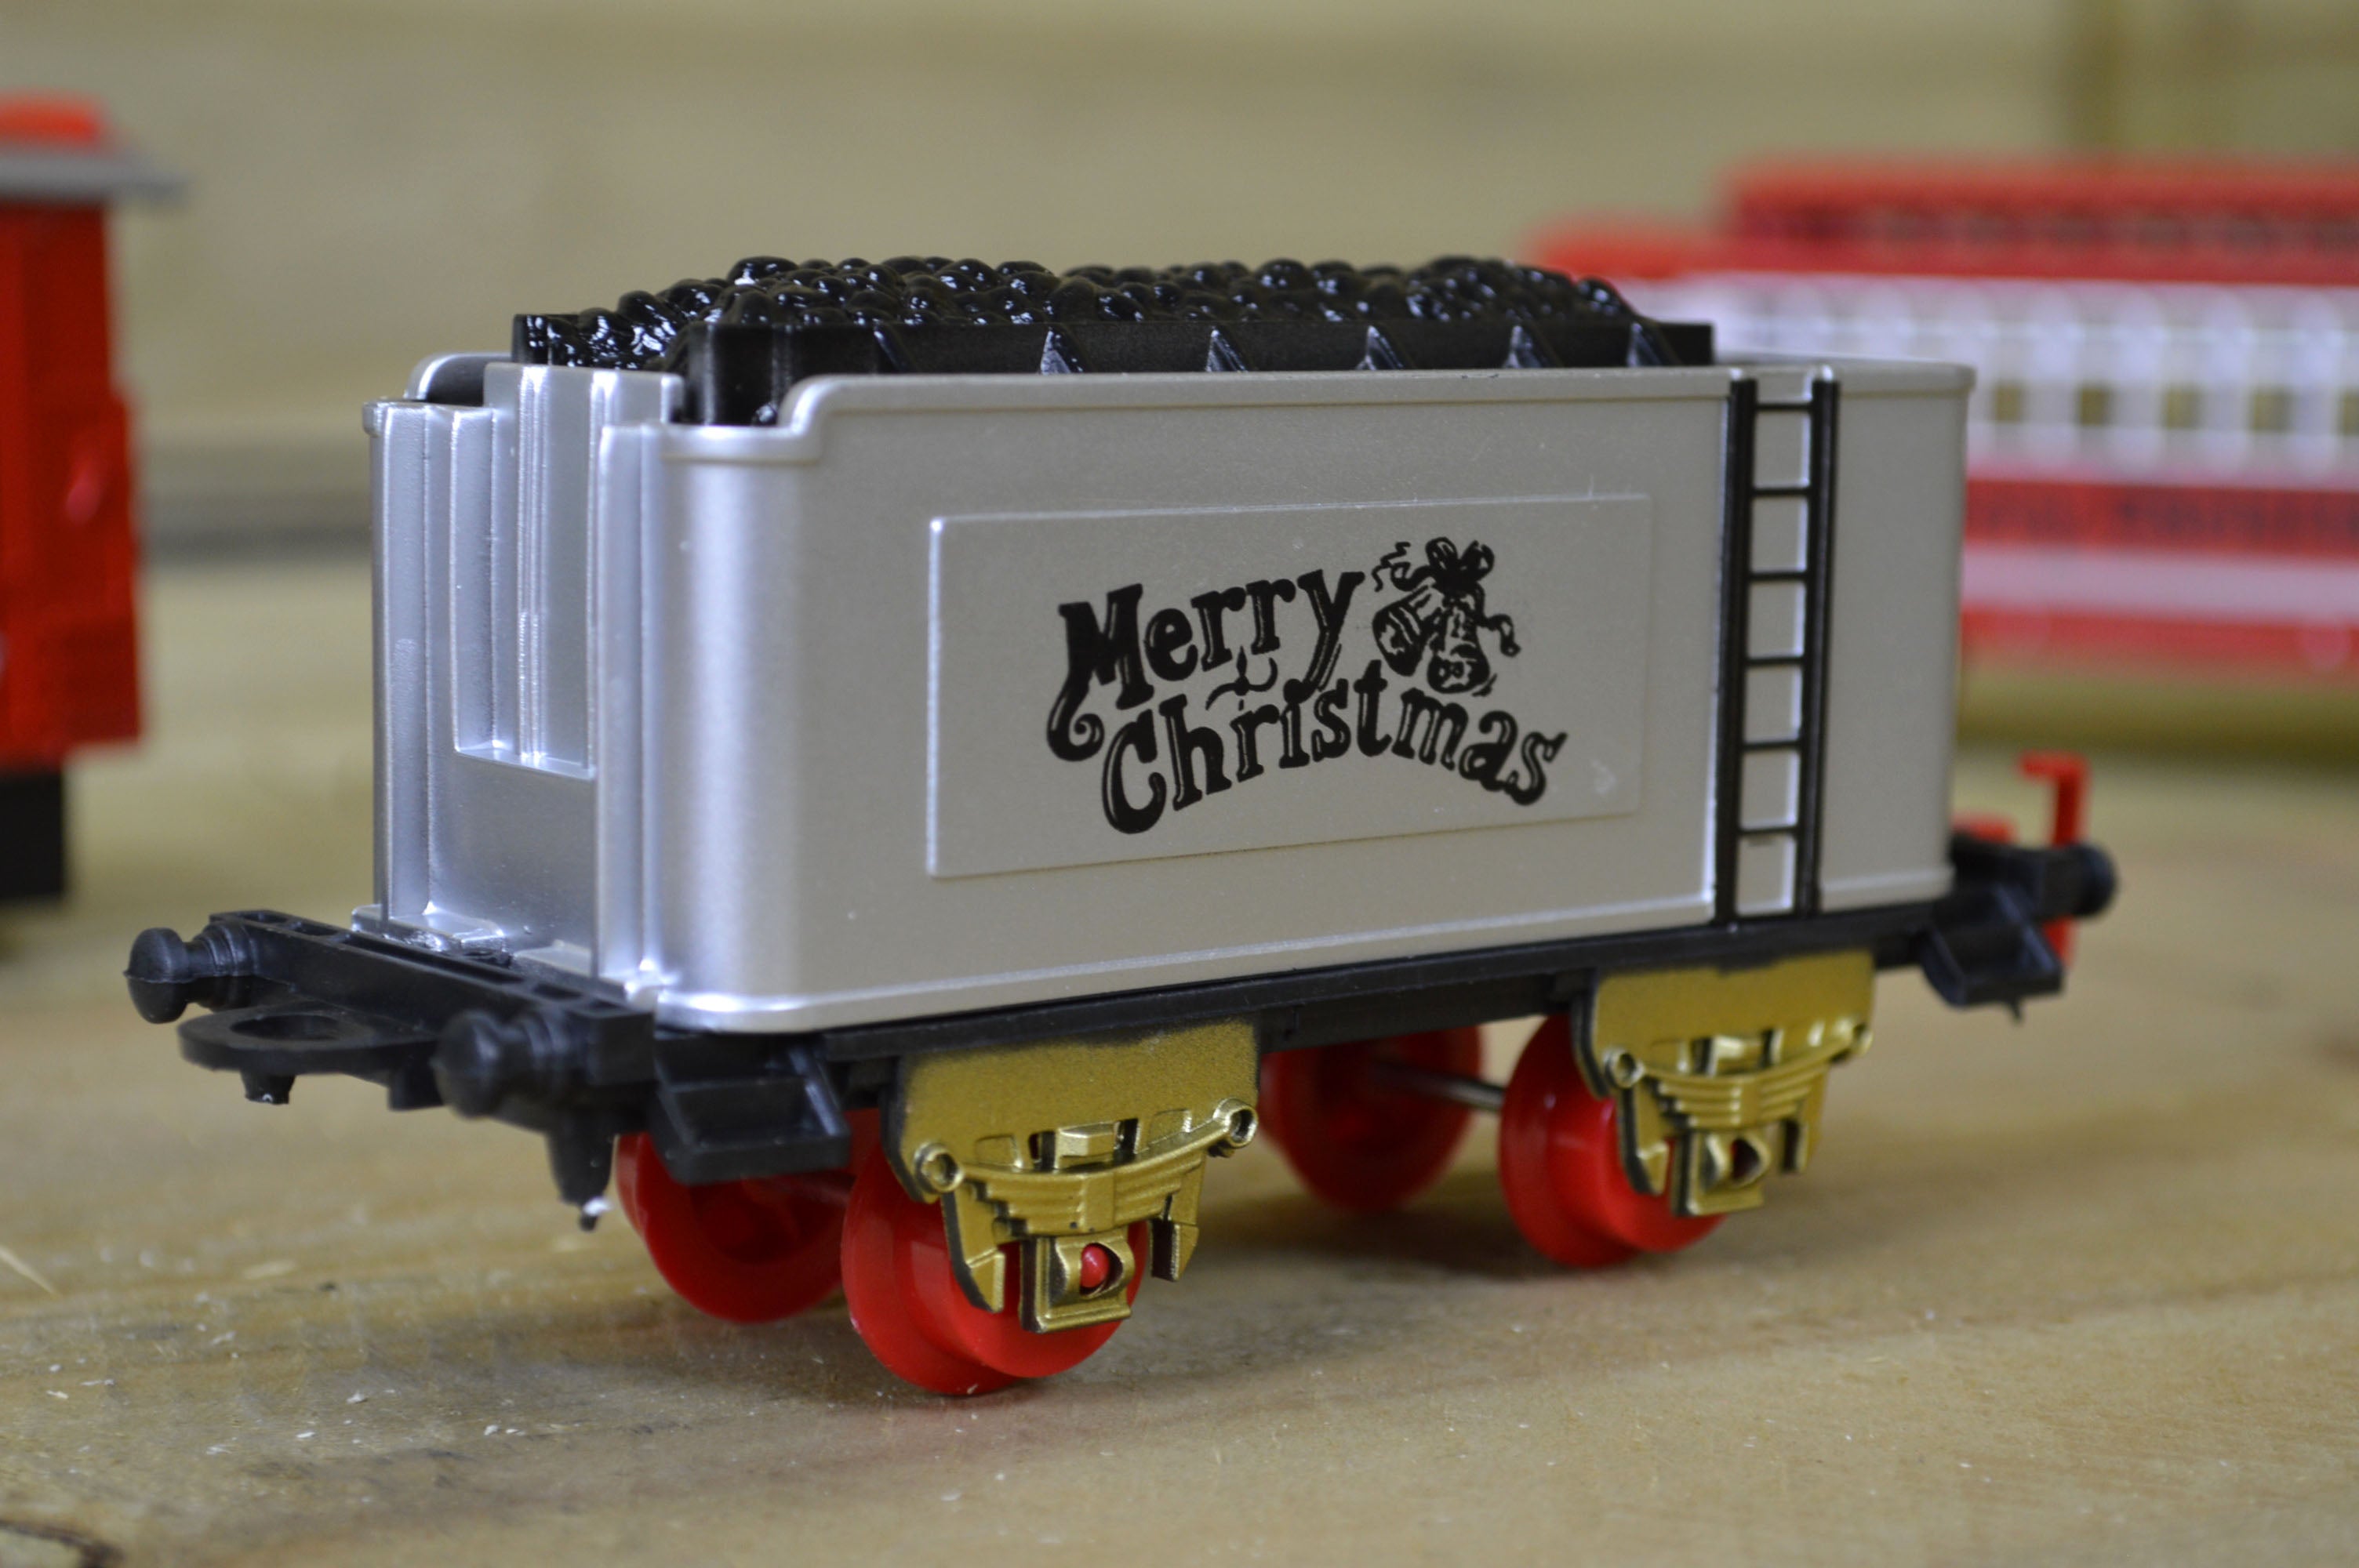 Premier Battery Operated Christmas Tree Train Toy with Carriage & Sound